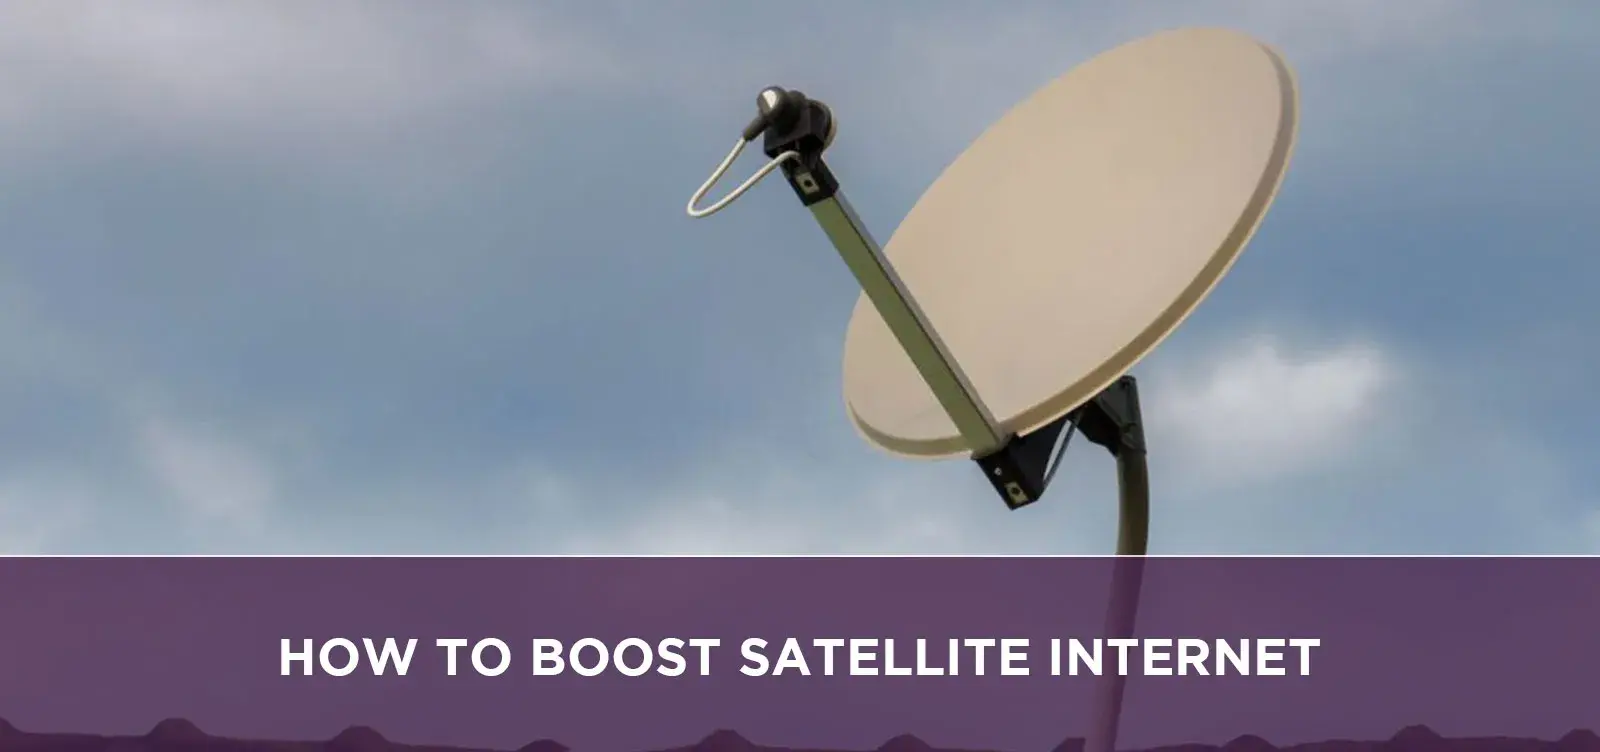 How To Boost Satellite Internet?